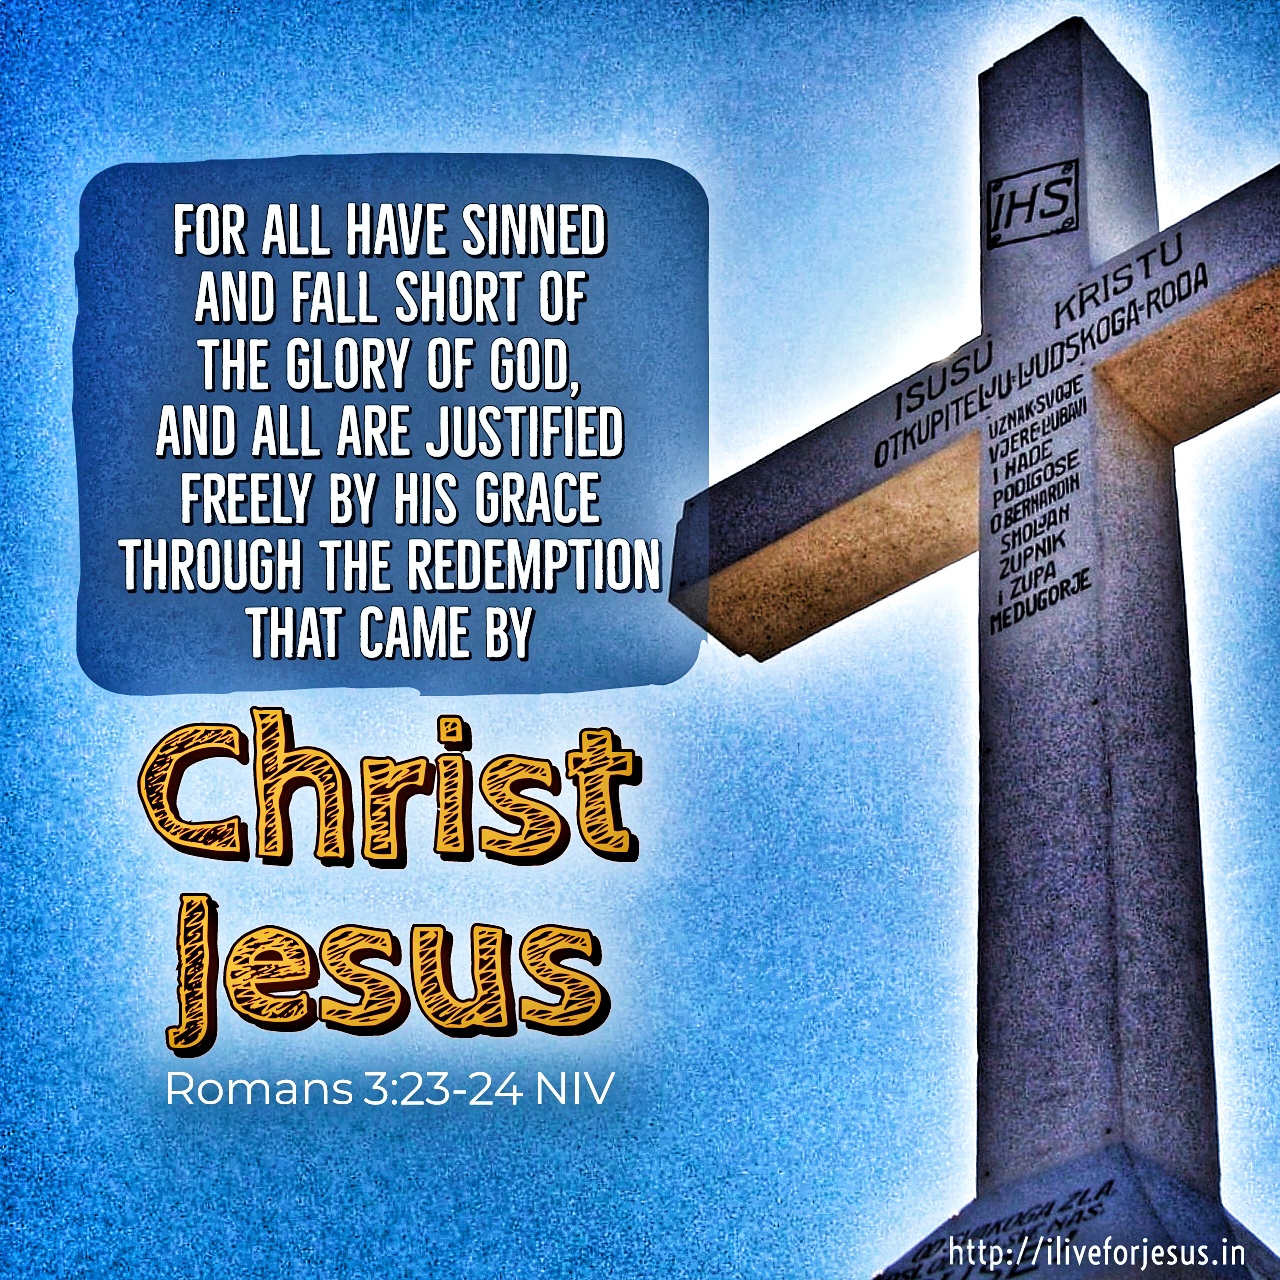 For all have sinned and fall short of the glory of God, and all are justified freely by his grace through the redemption that came by Christ Jesus. Romans 3:23‭-‬24 NIV https://bible.com/bible/111/rom.3.23-24.NIV